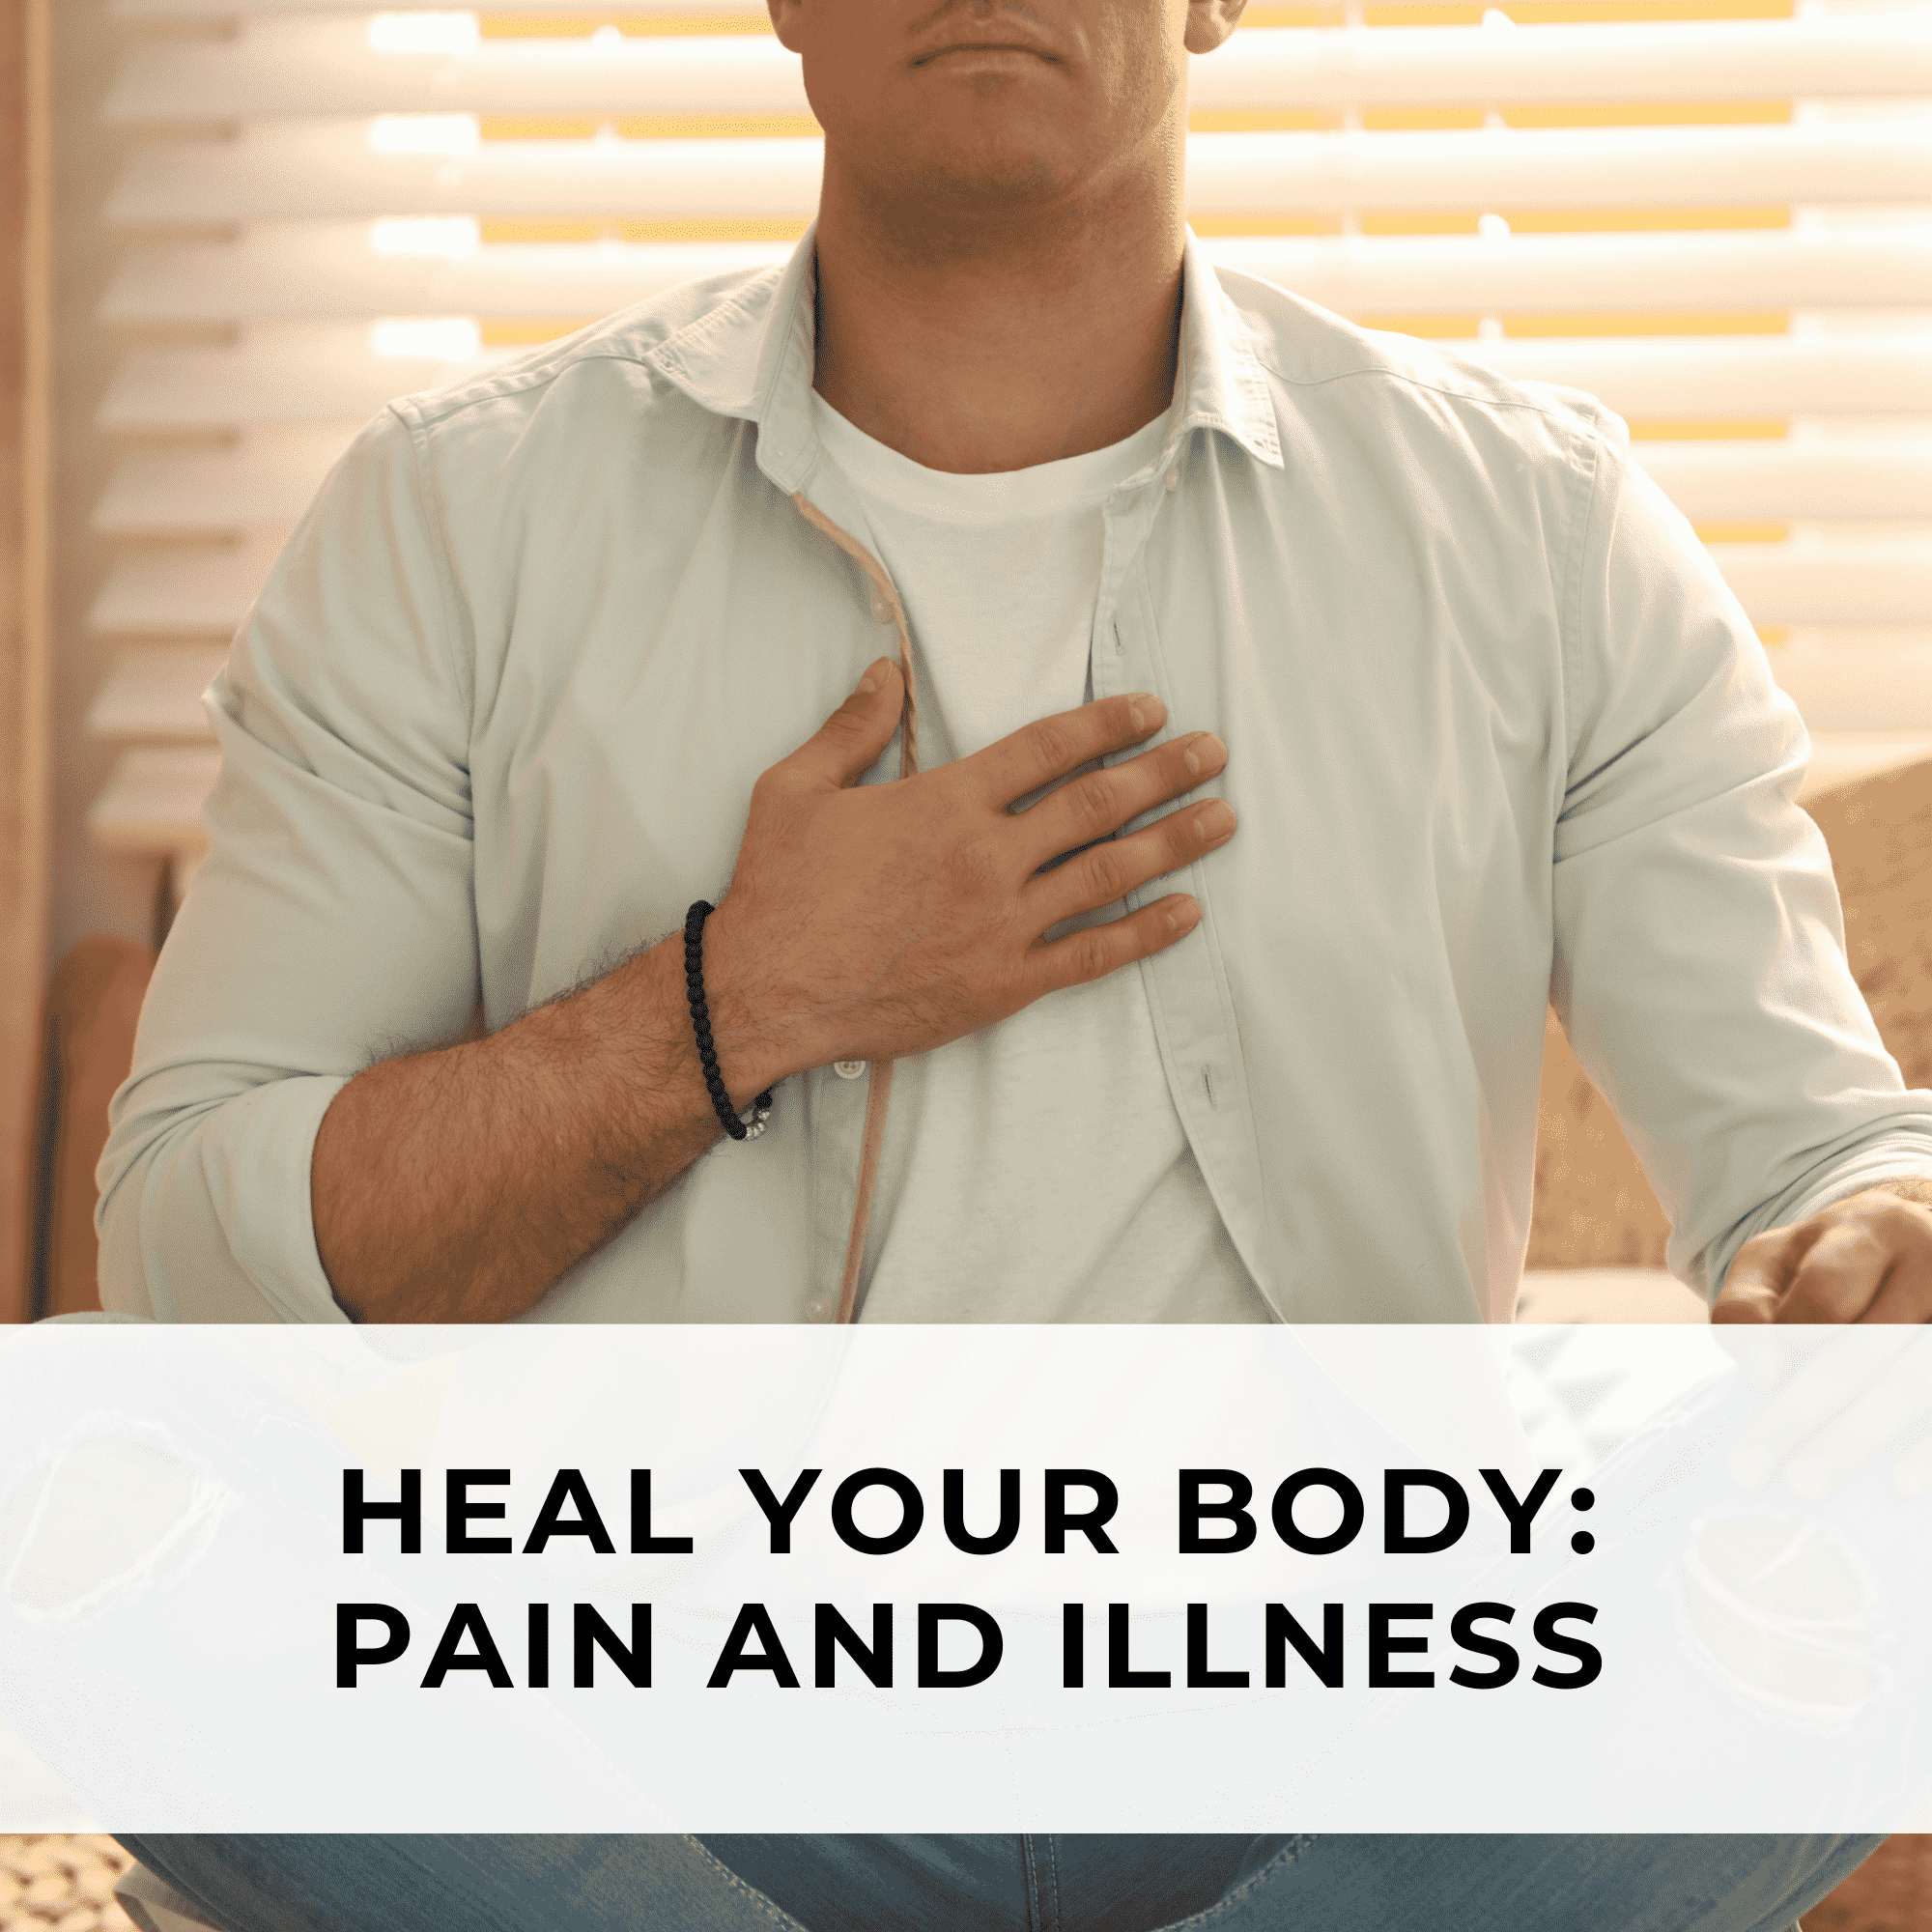 Heal your body and pain